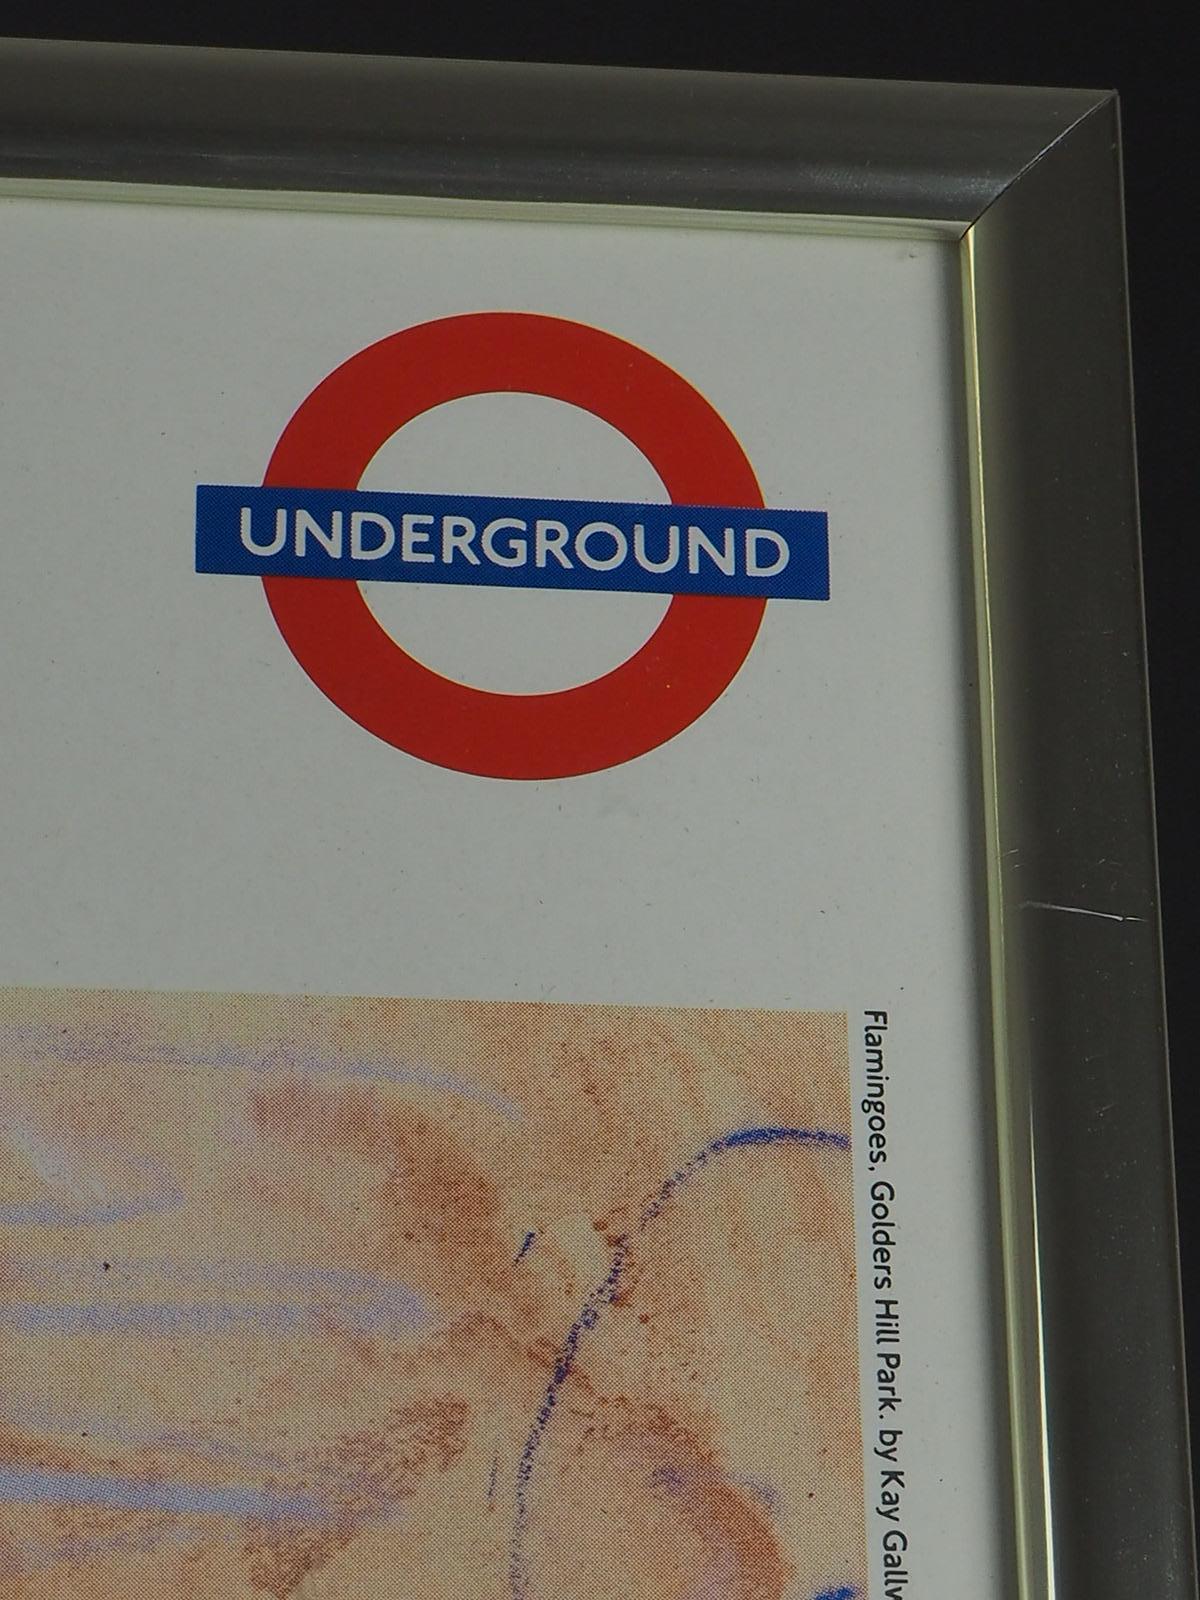 Framed Original Vintage London Underground Poster Flamingoes By Tube Golders Hil In Excellent Condition For Sale In Lincoln, GB